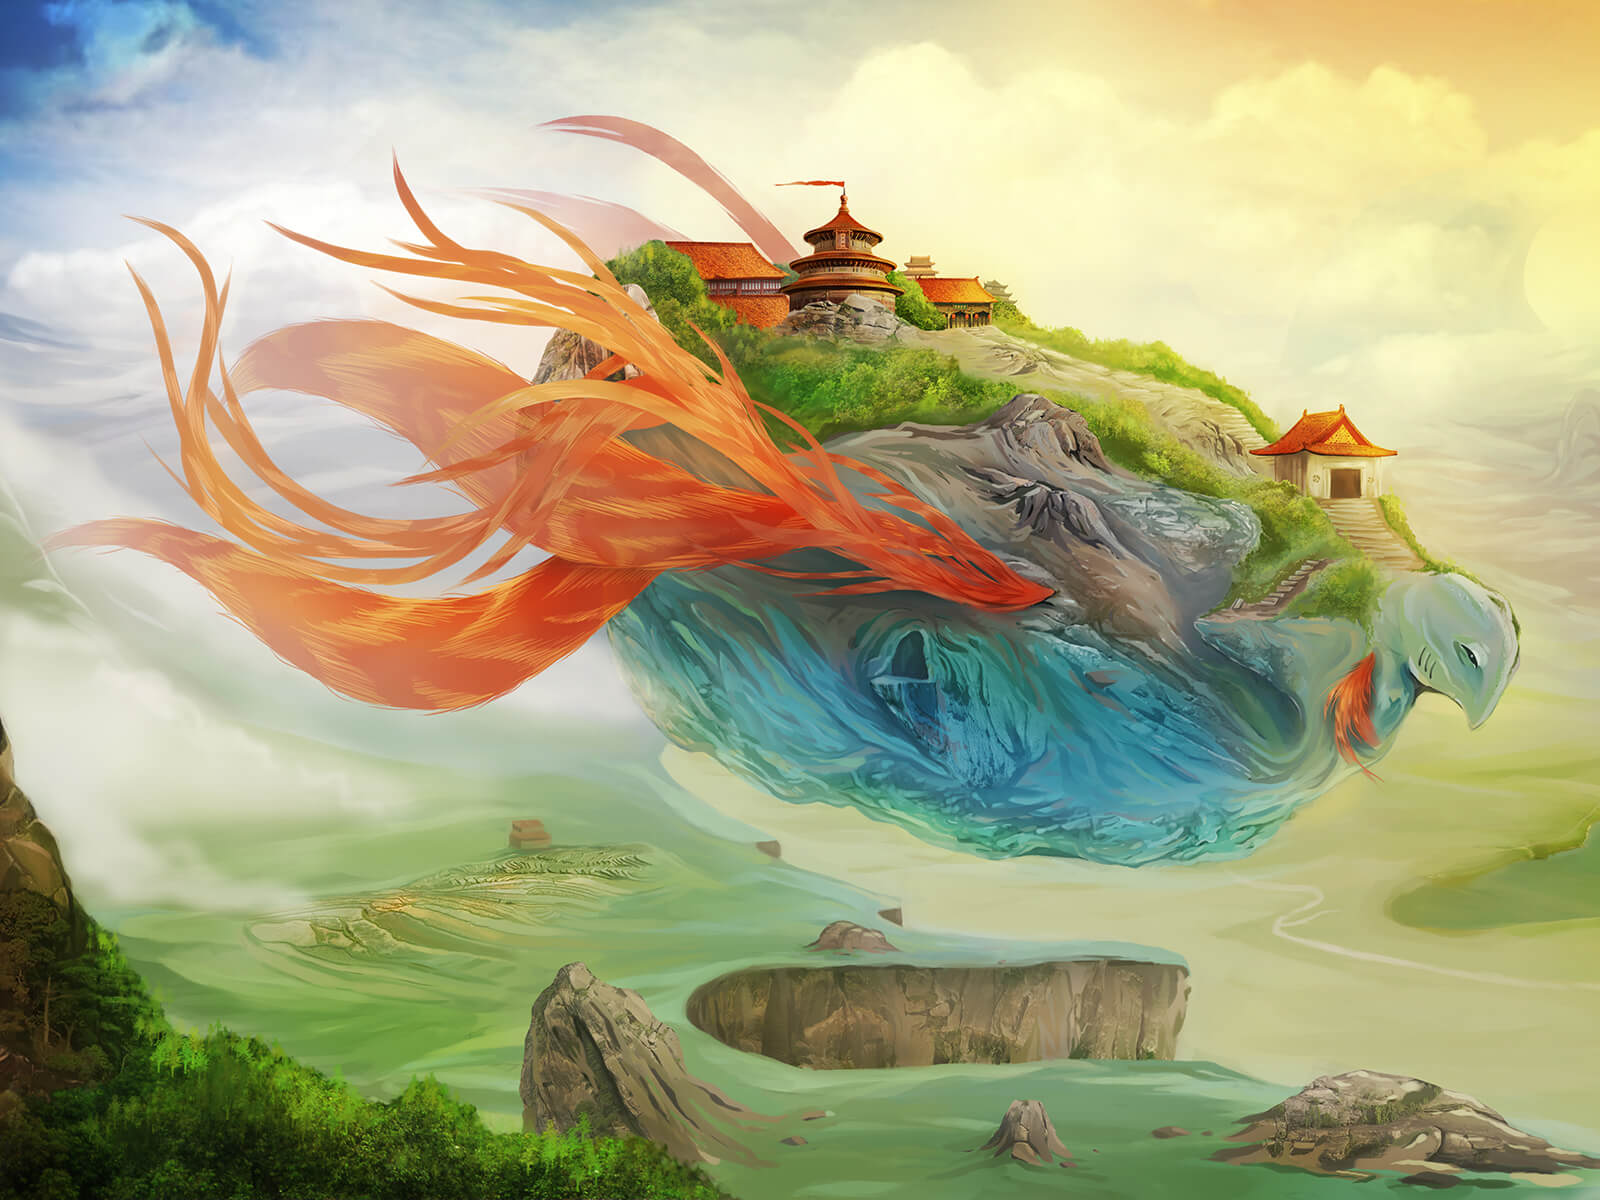 A village stands on the back of a mythical, red-frilled, blue beast drifting above a surreal, cloudy plain.